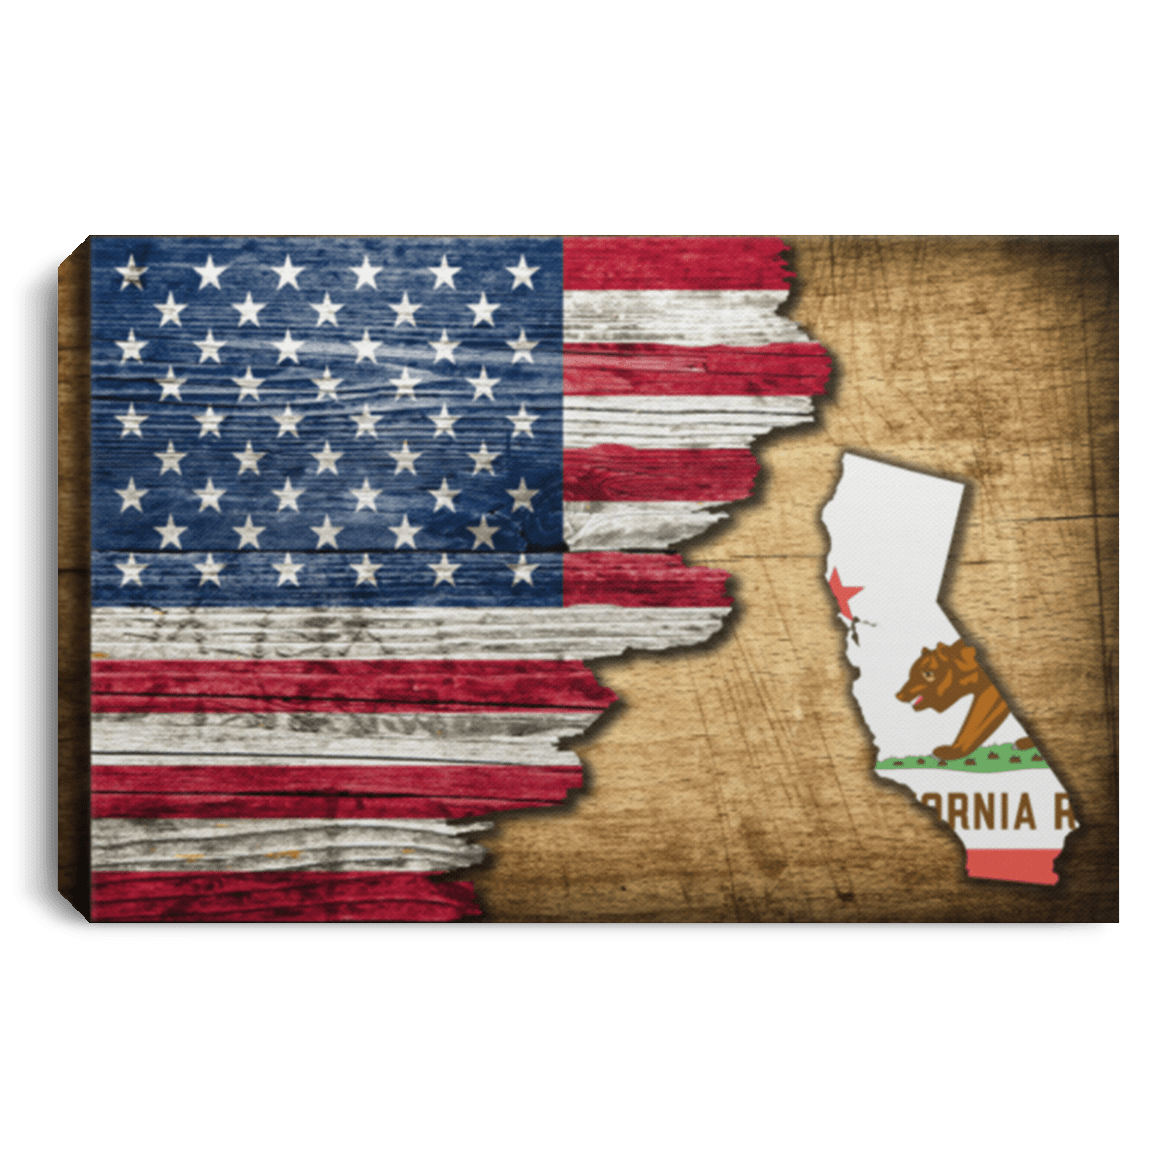 United States/California Flag Ripped Effect 12X8 Inches Landscape Canvas .75In Frame